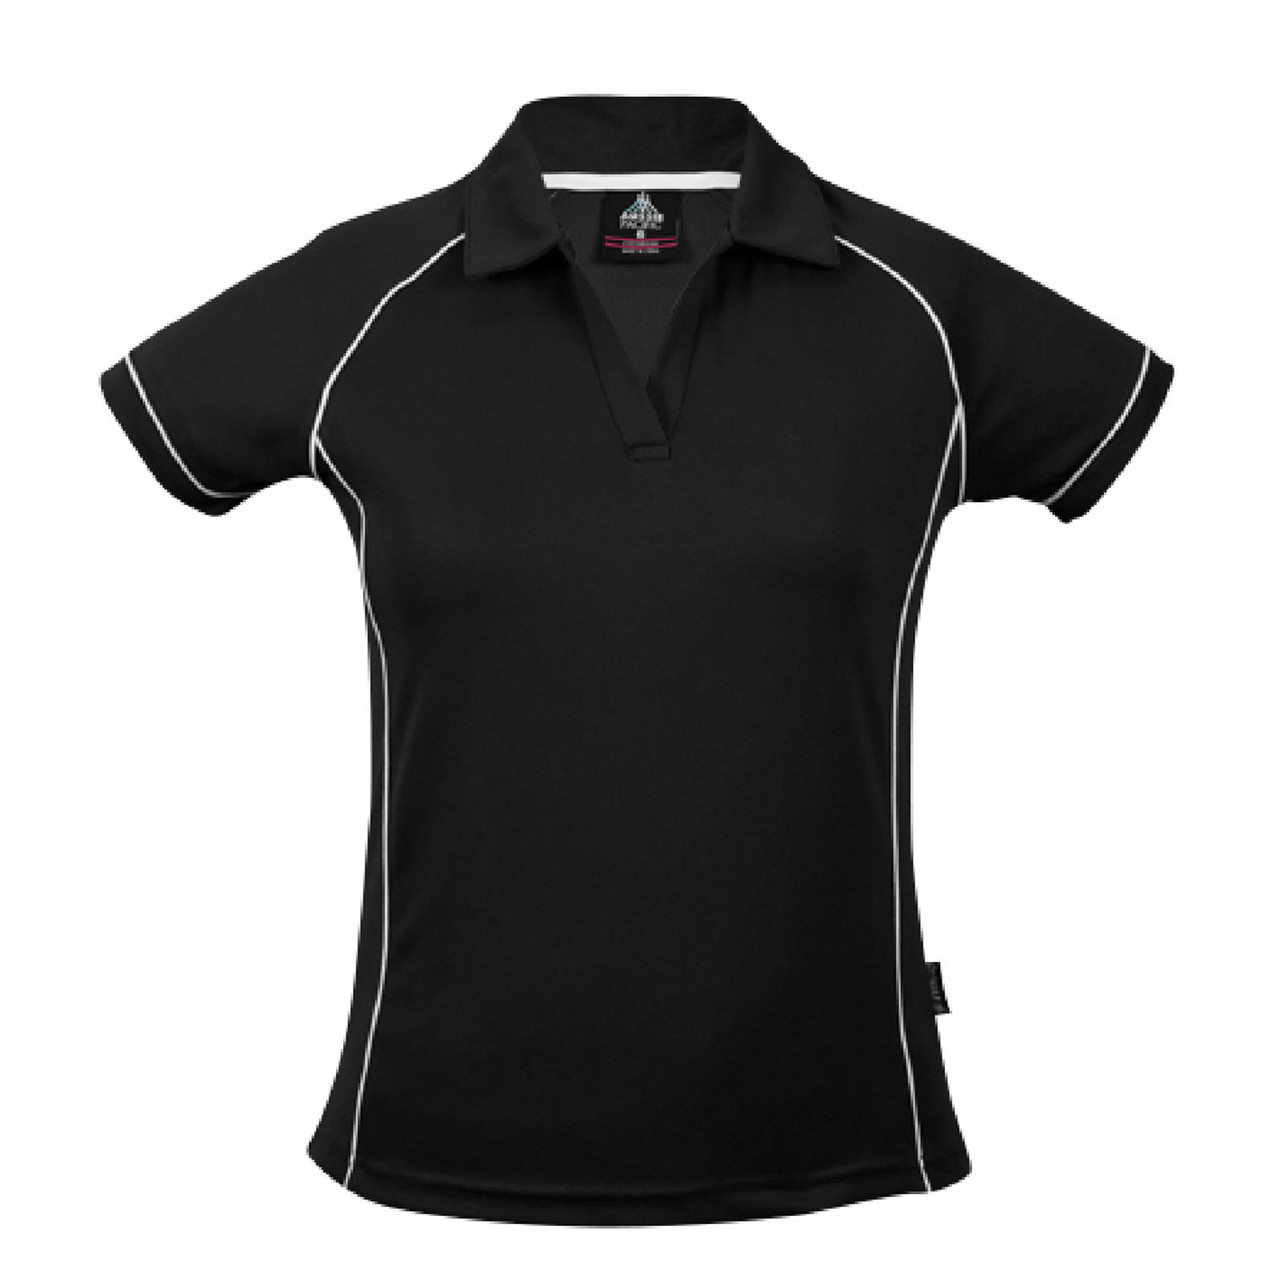 Ladies Contrast Piping Sports Polo Shirt | Shop Wholesale Clothing Online